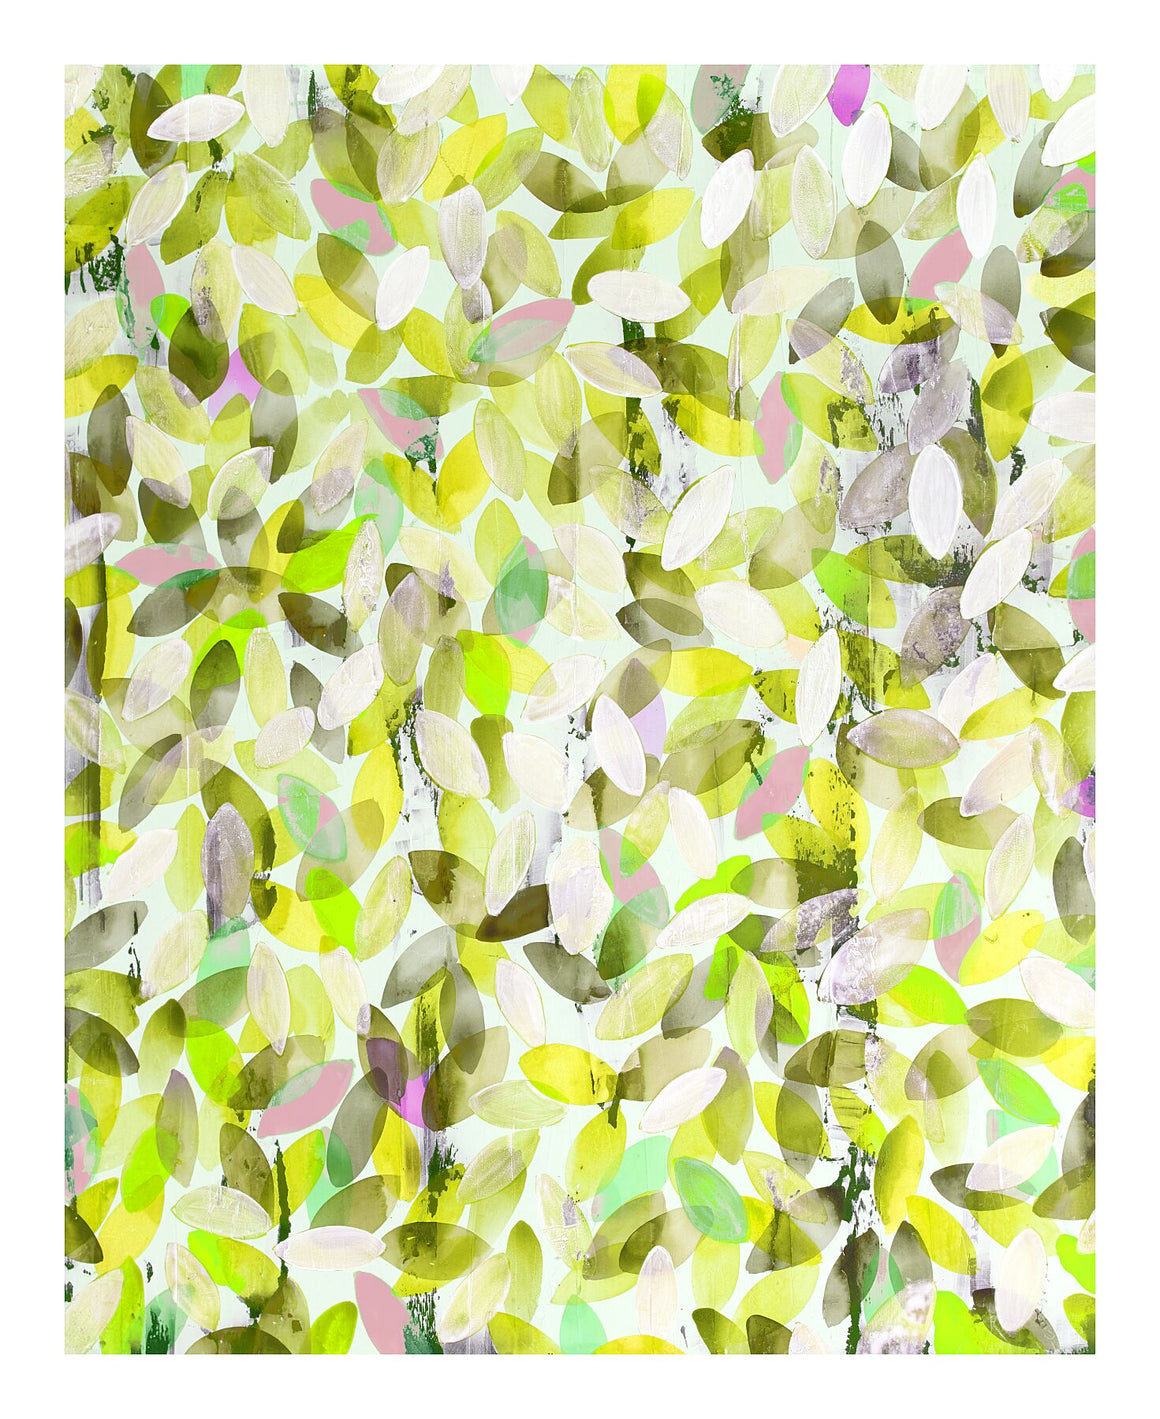 Abstract leaves print in yellow and green - Urban Fall in Spring - by Anna Jacobs